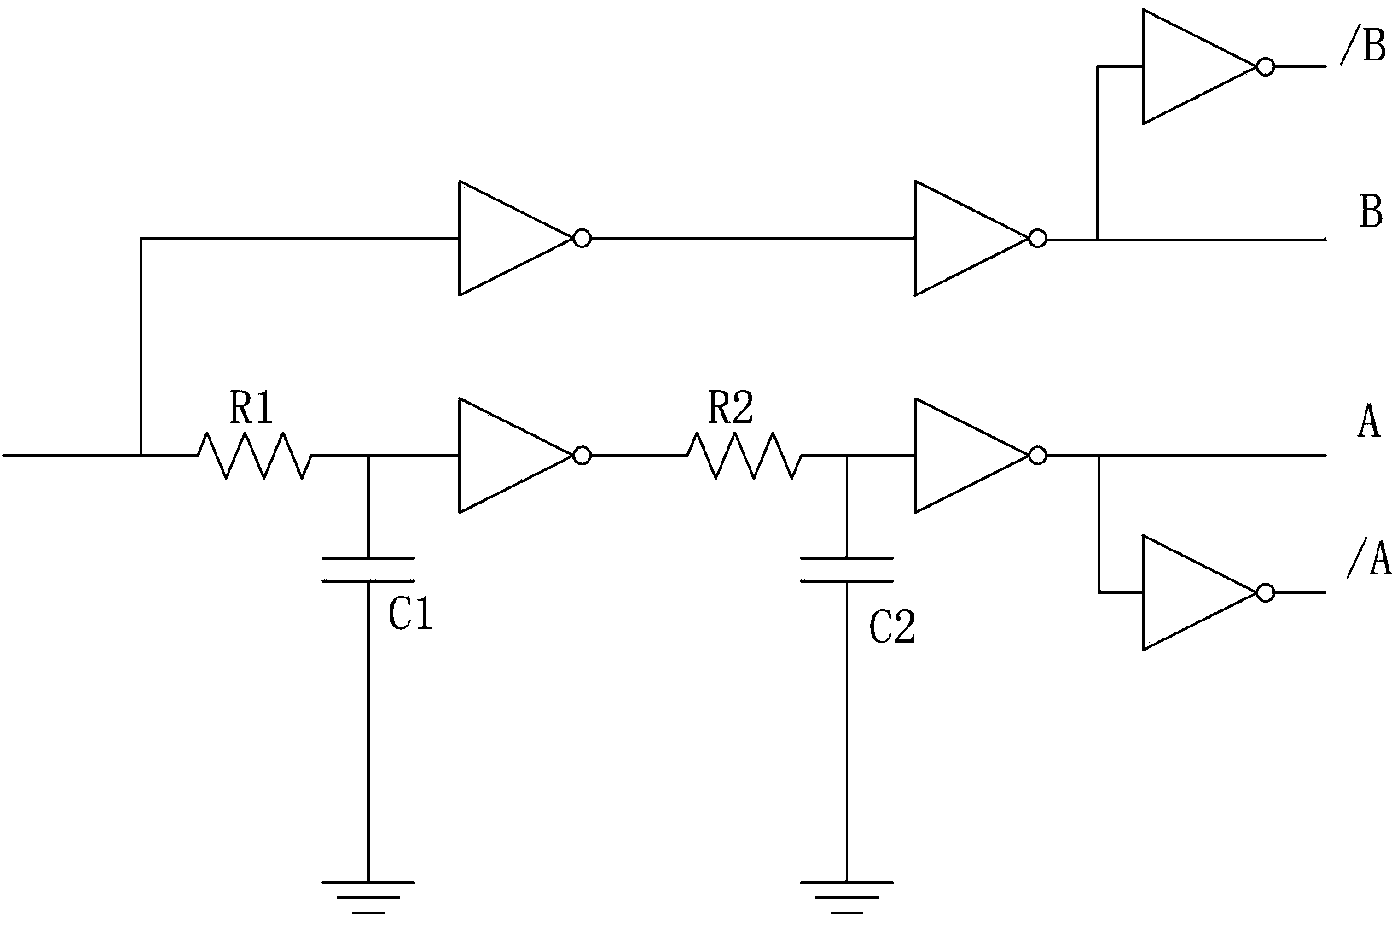 Pulse signal conversion device for acquiring and synchronously triggering sound field measured data of ultrasonic phased array energy converter